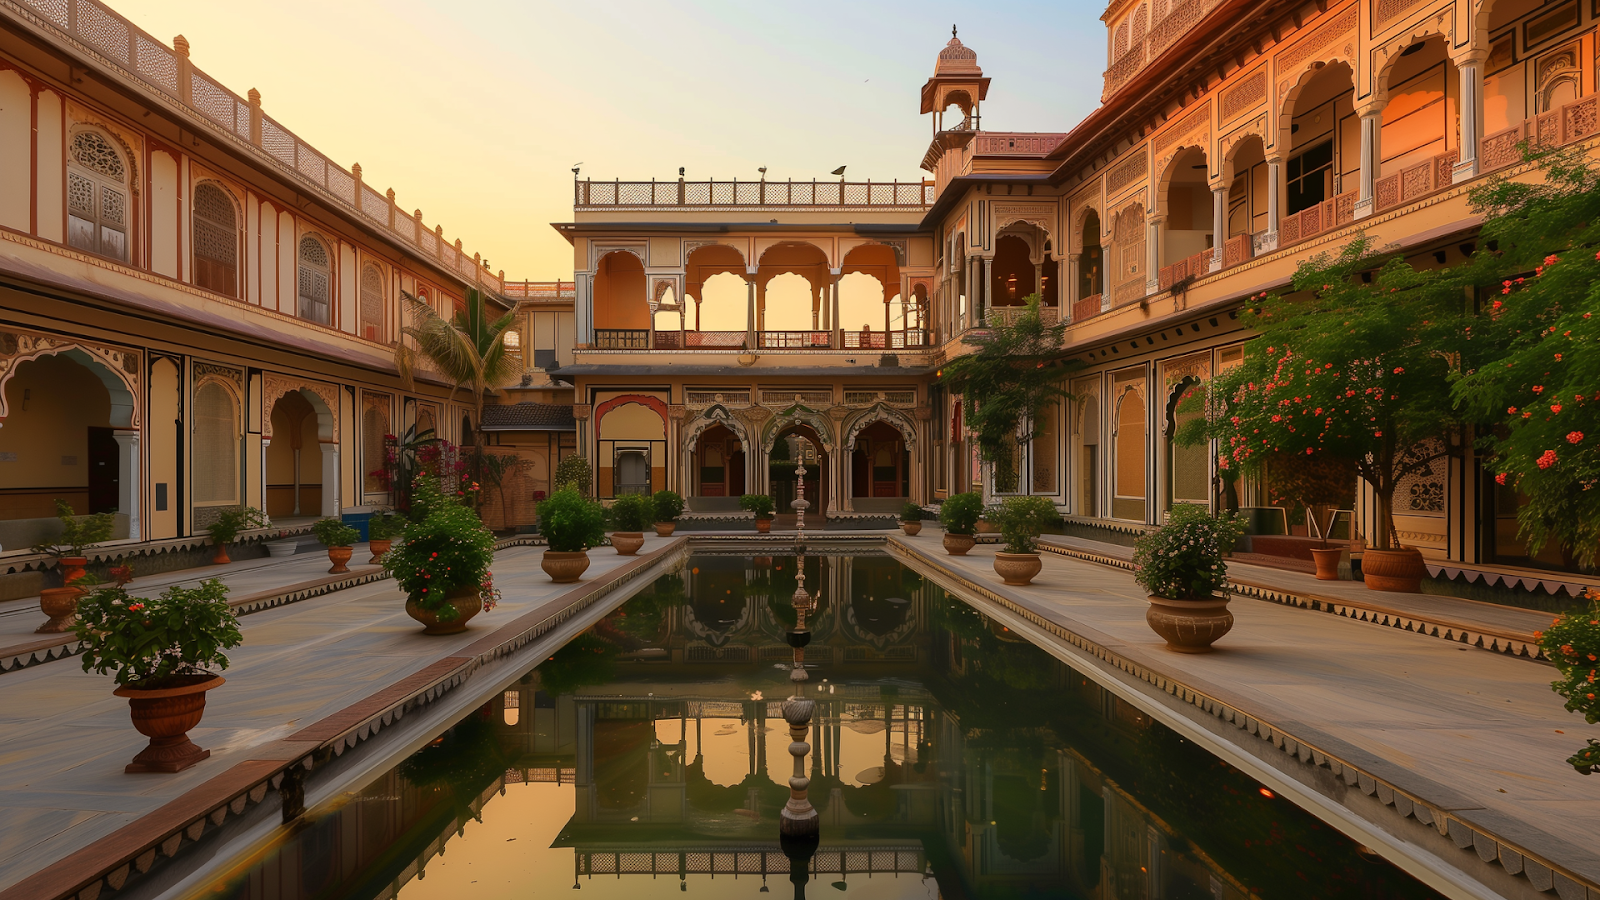 Sunrise illuminates a Rajasthani palace hotel's intricate façade and courtyard water features.